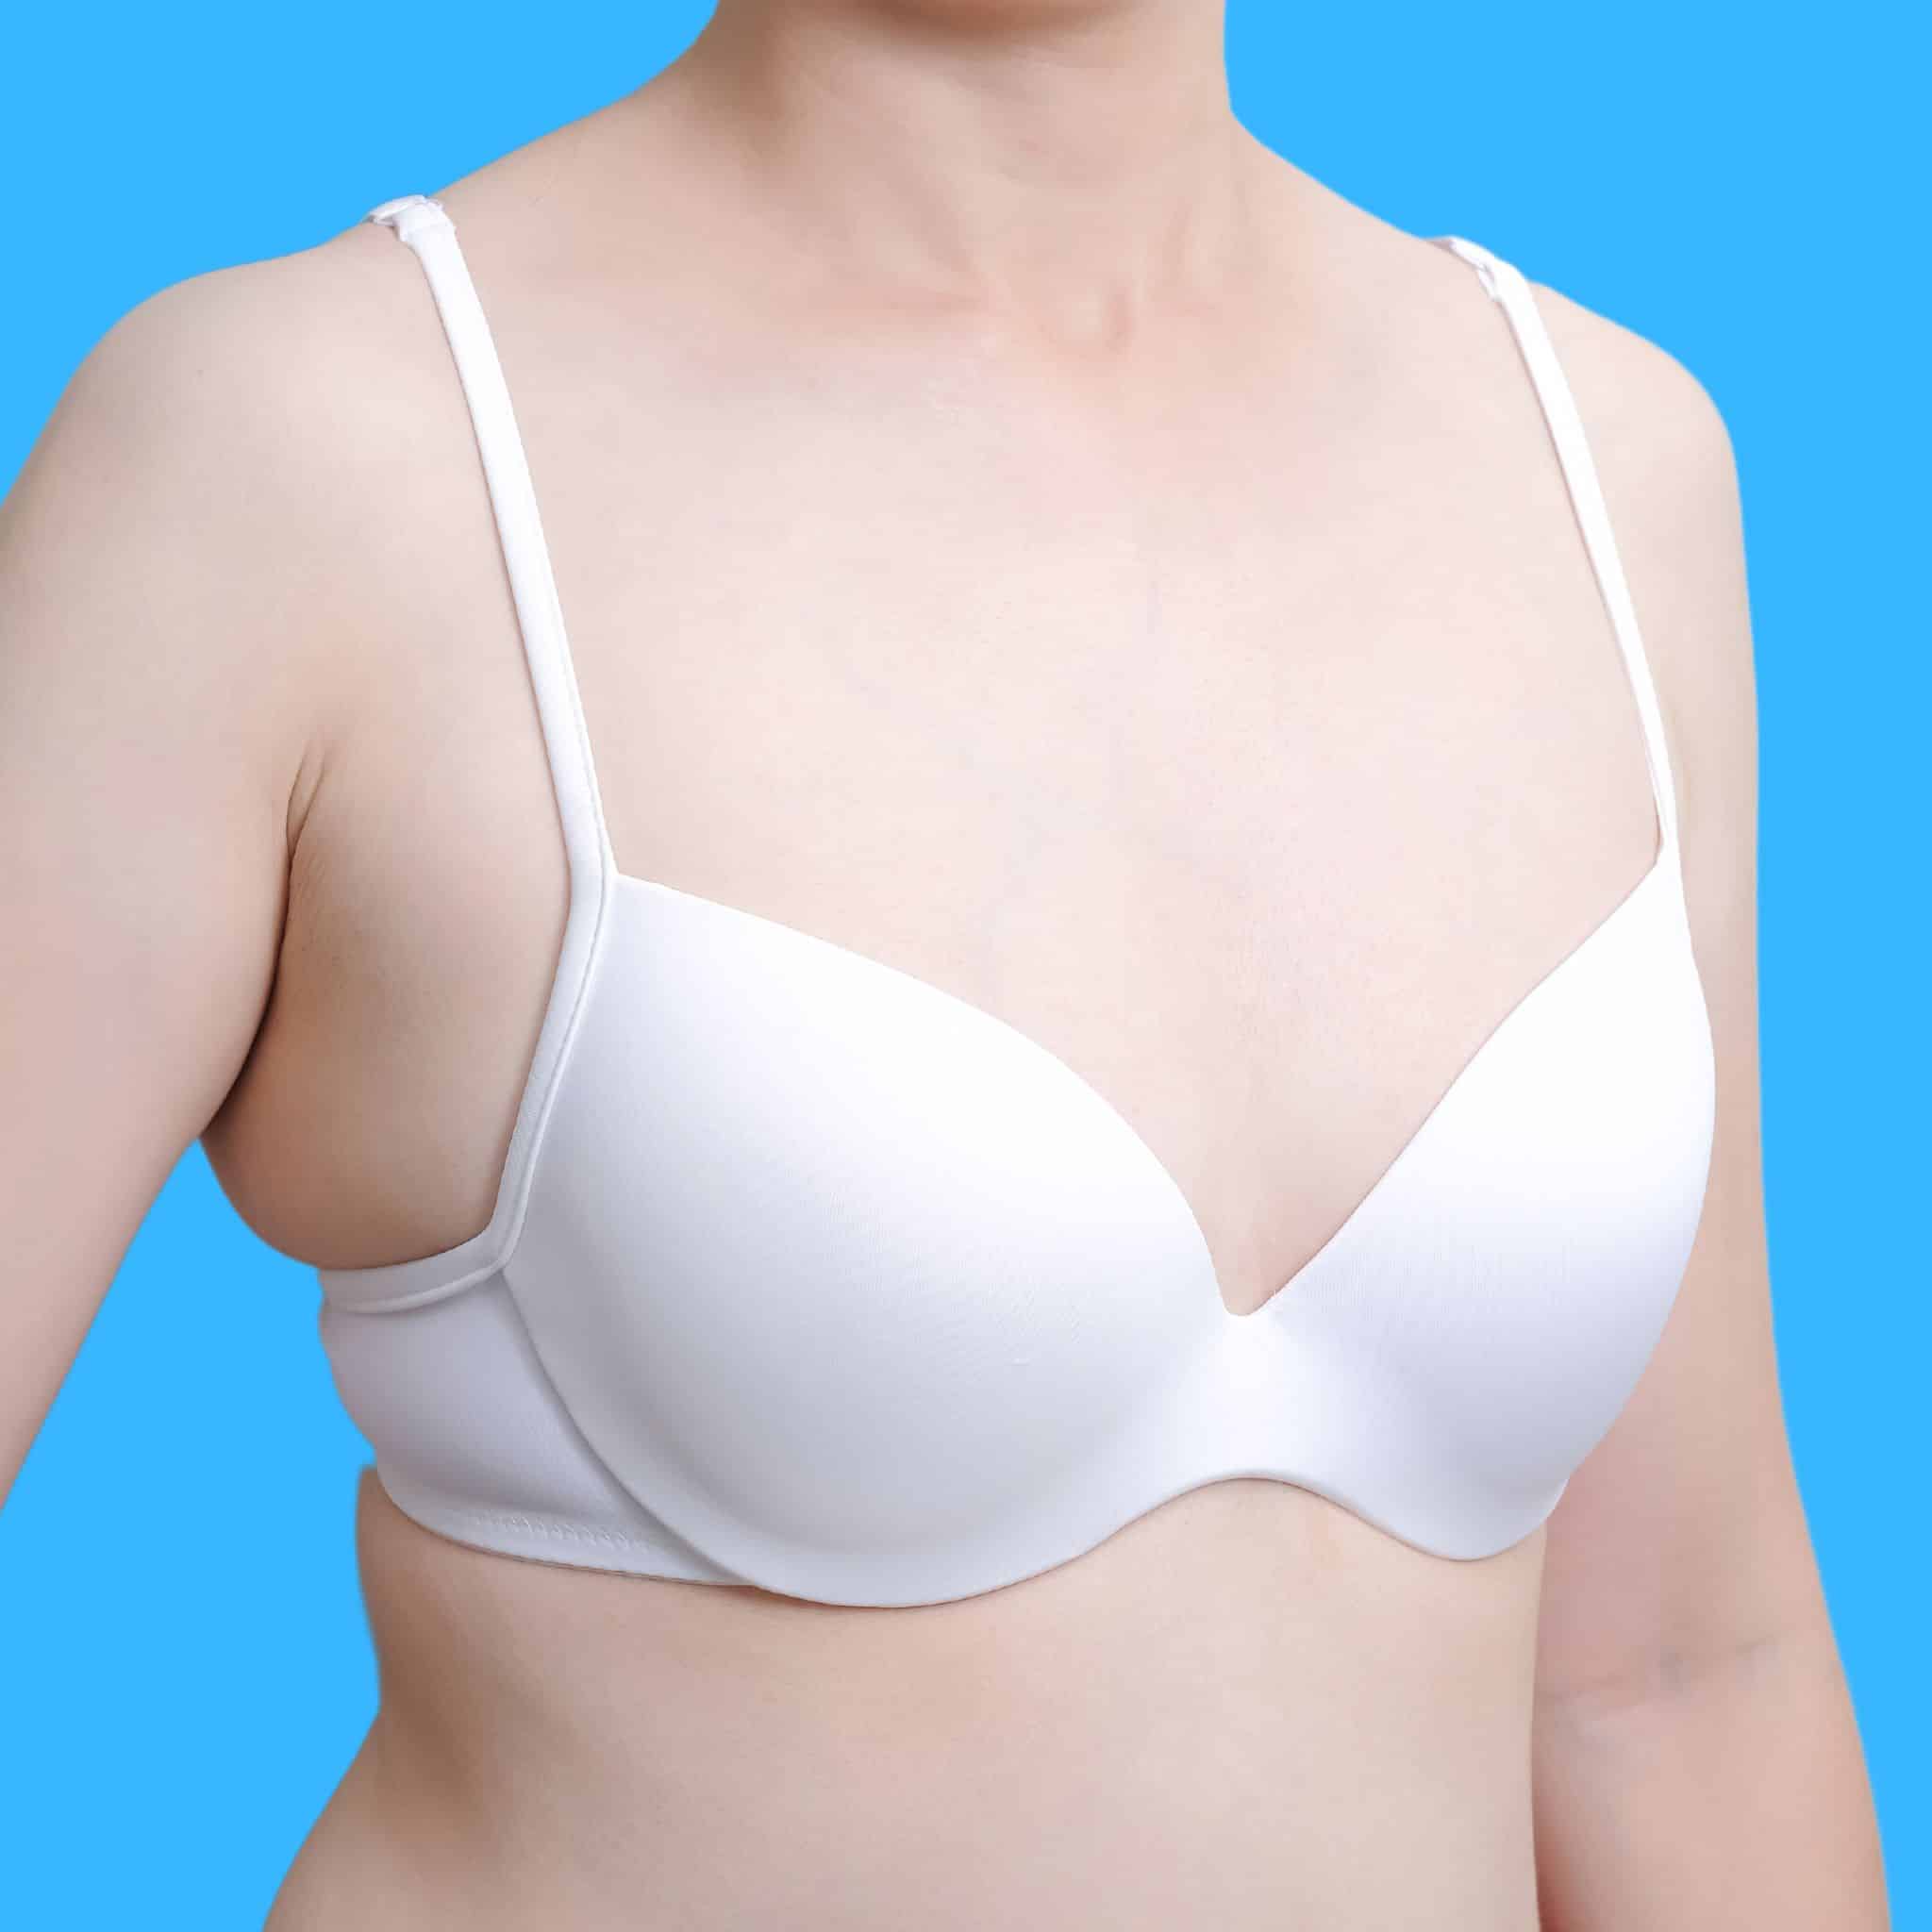 An image of a woman with small boobs before using our breast augmentation products.